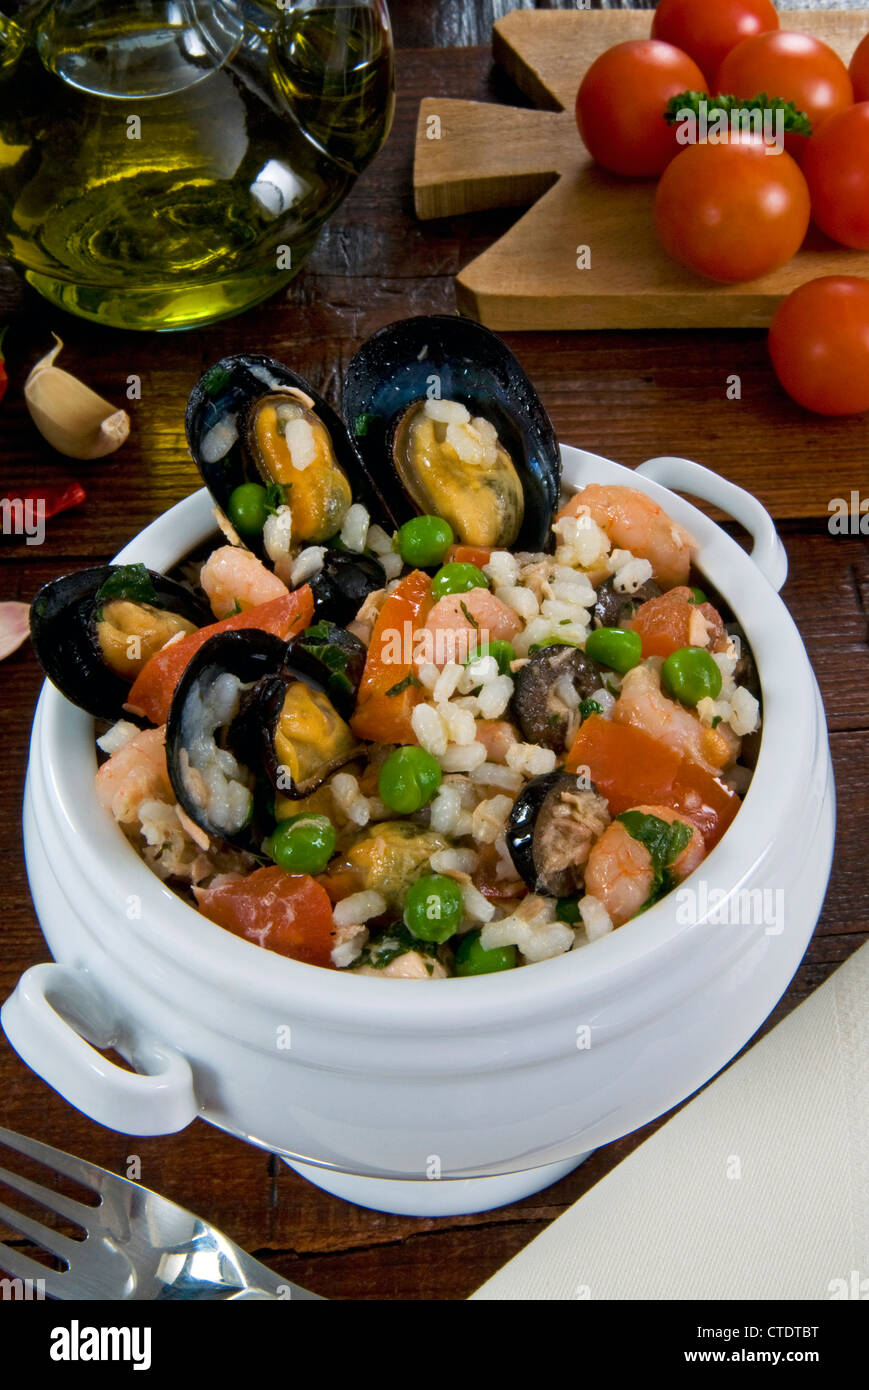 Seafood rice with mussels, shrimps, tomato, olives, peas, Italian cuisine, Italian food, Italy Stock Photo